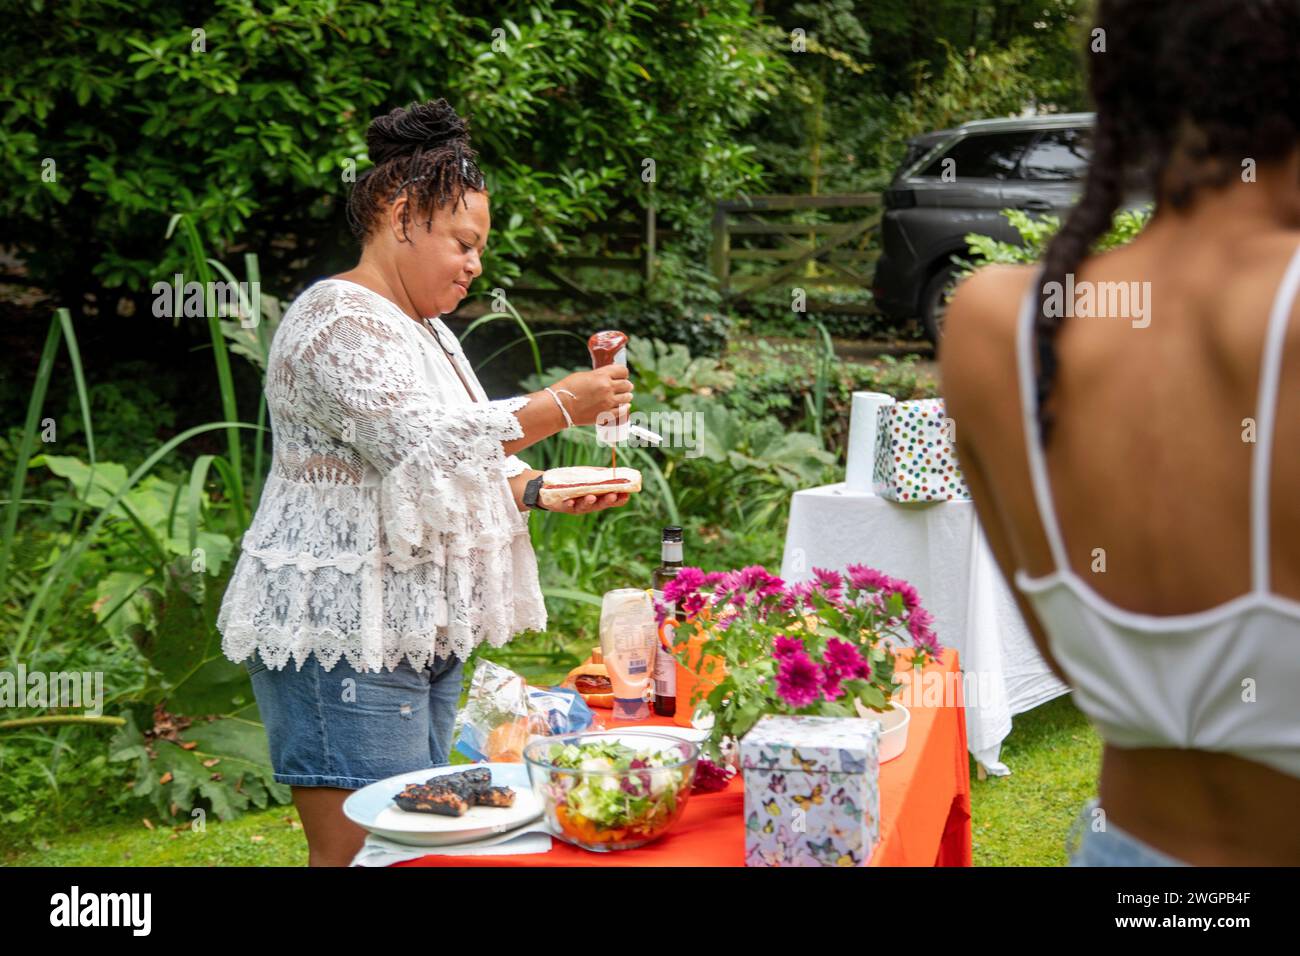 Women enjoying a summer BBQ garden party cooking and eating outside Stock Photo